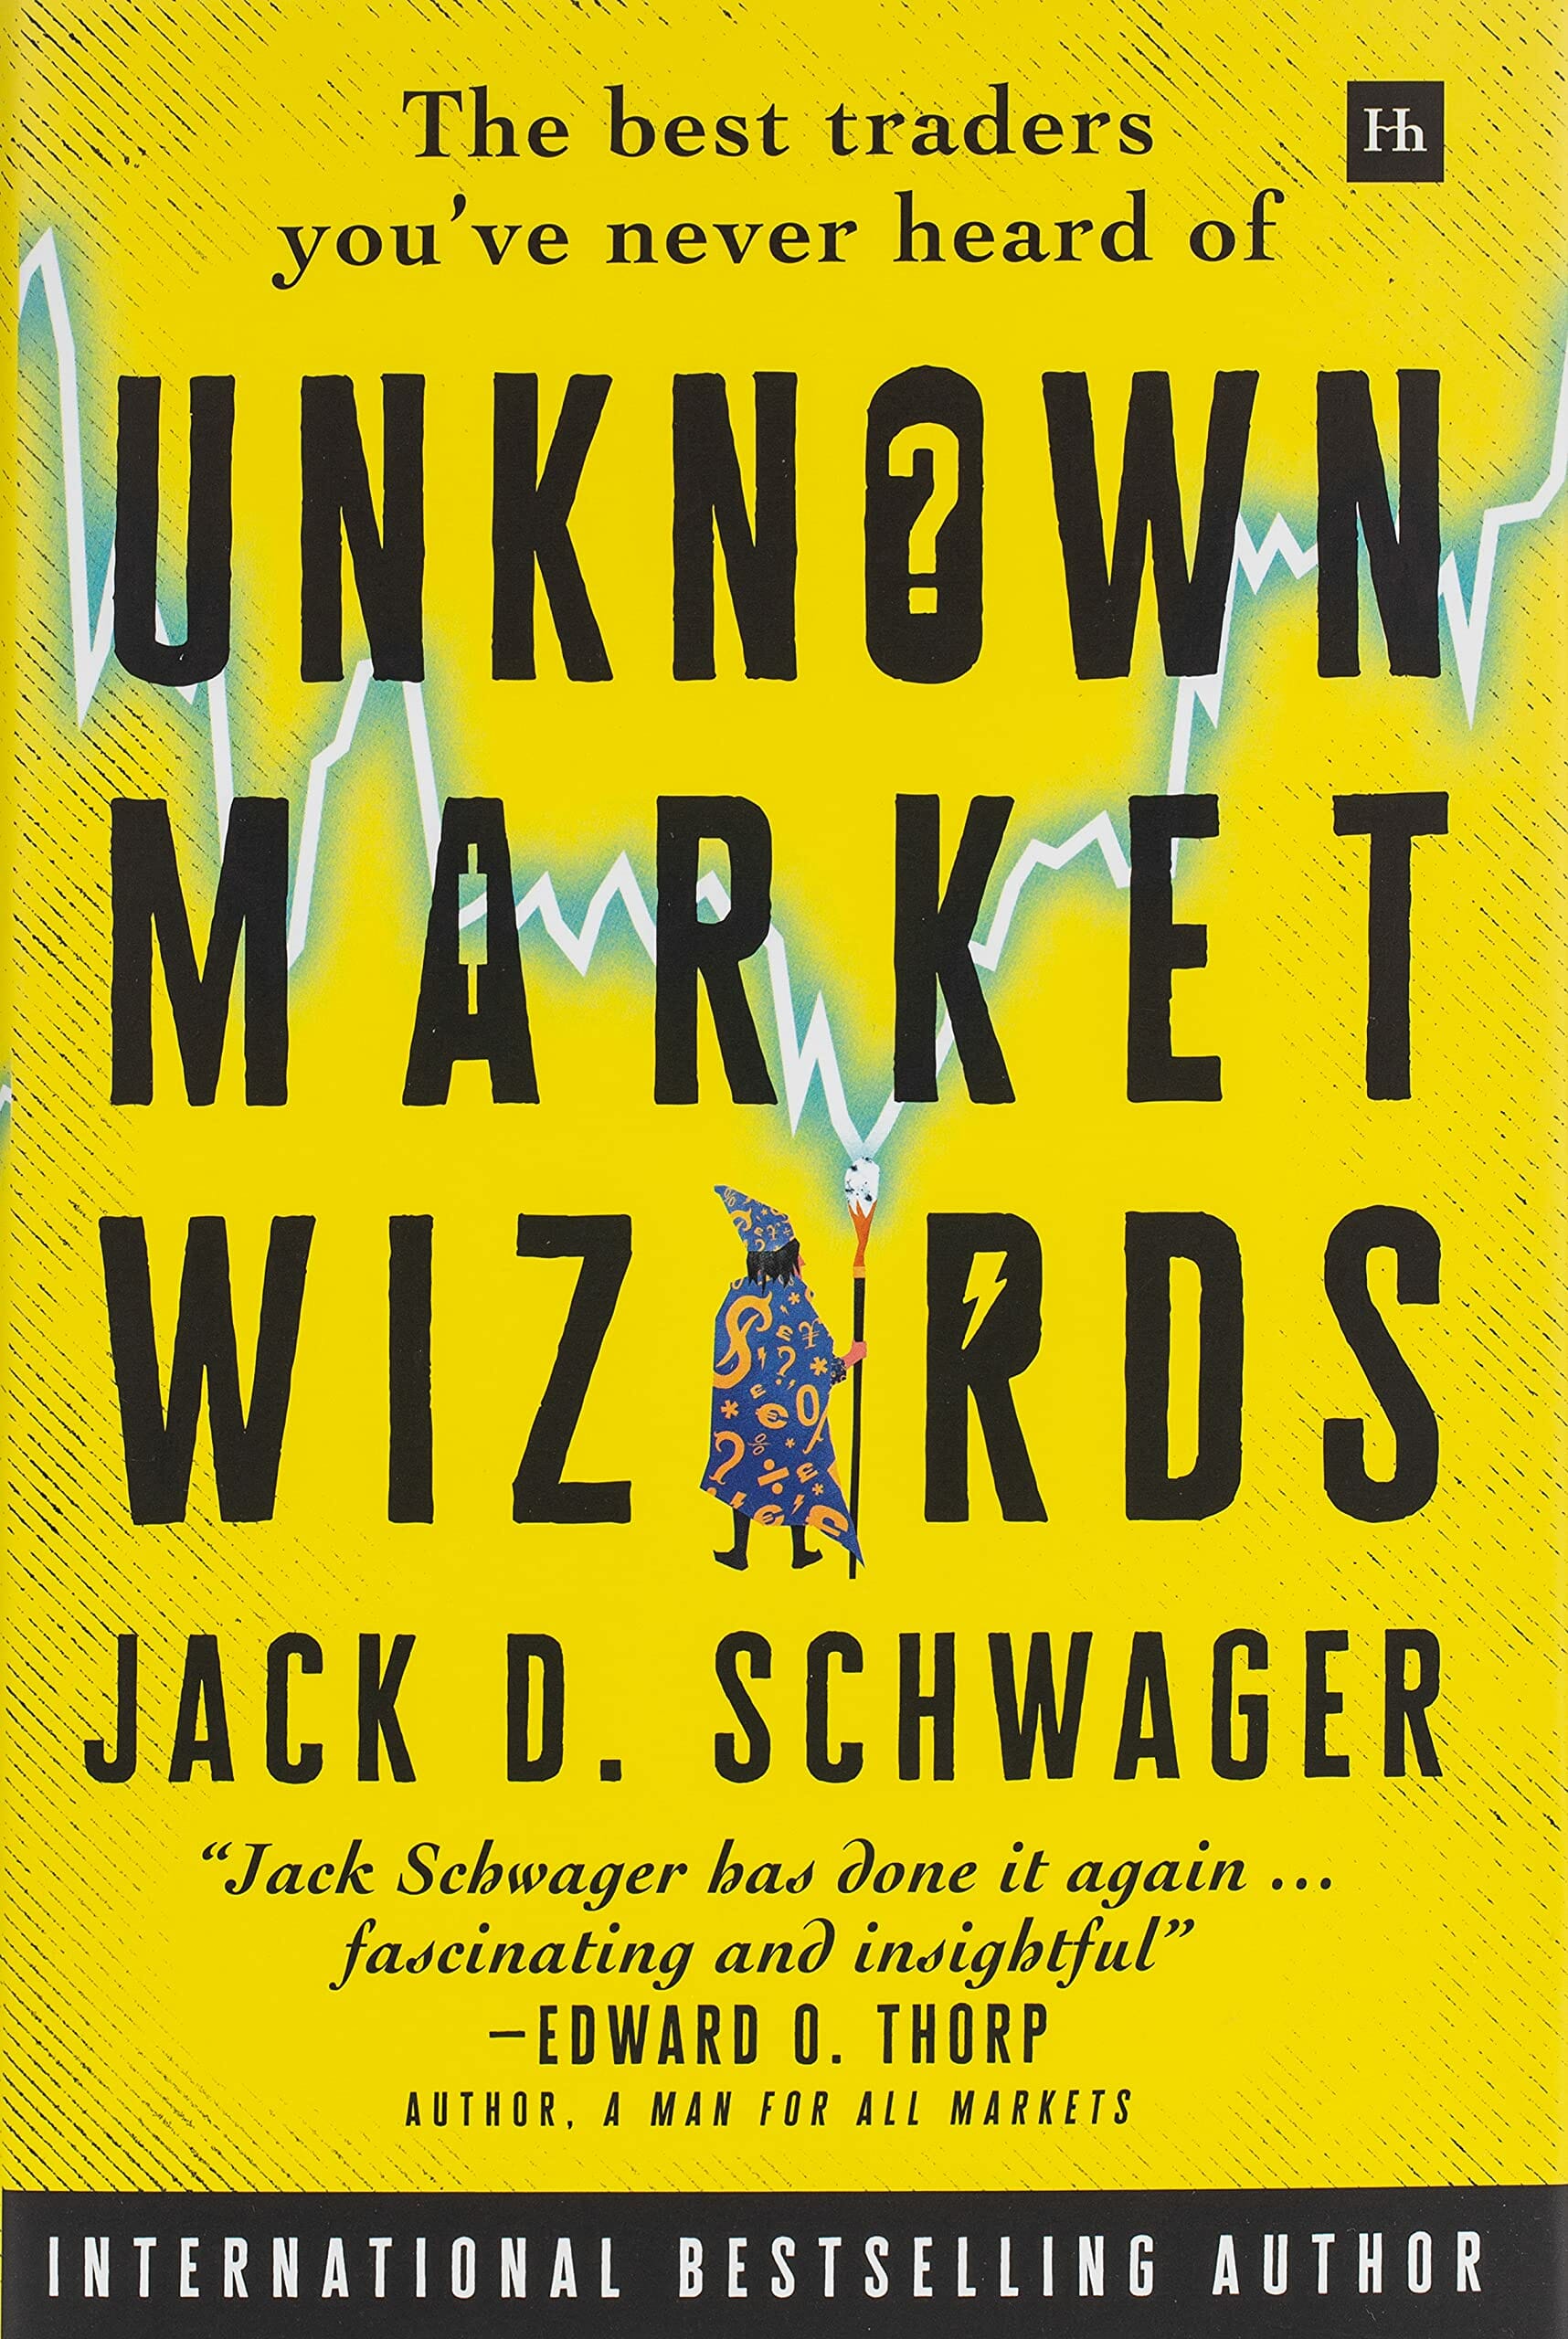 Trading book review_unknown market wizards_jack d. Schwager